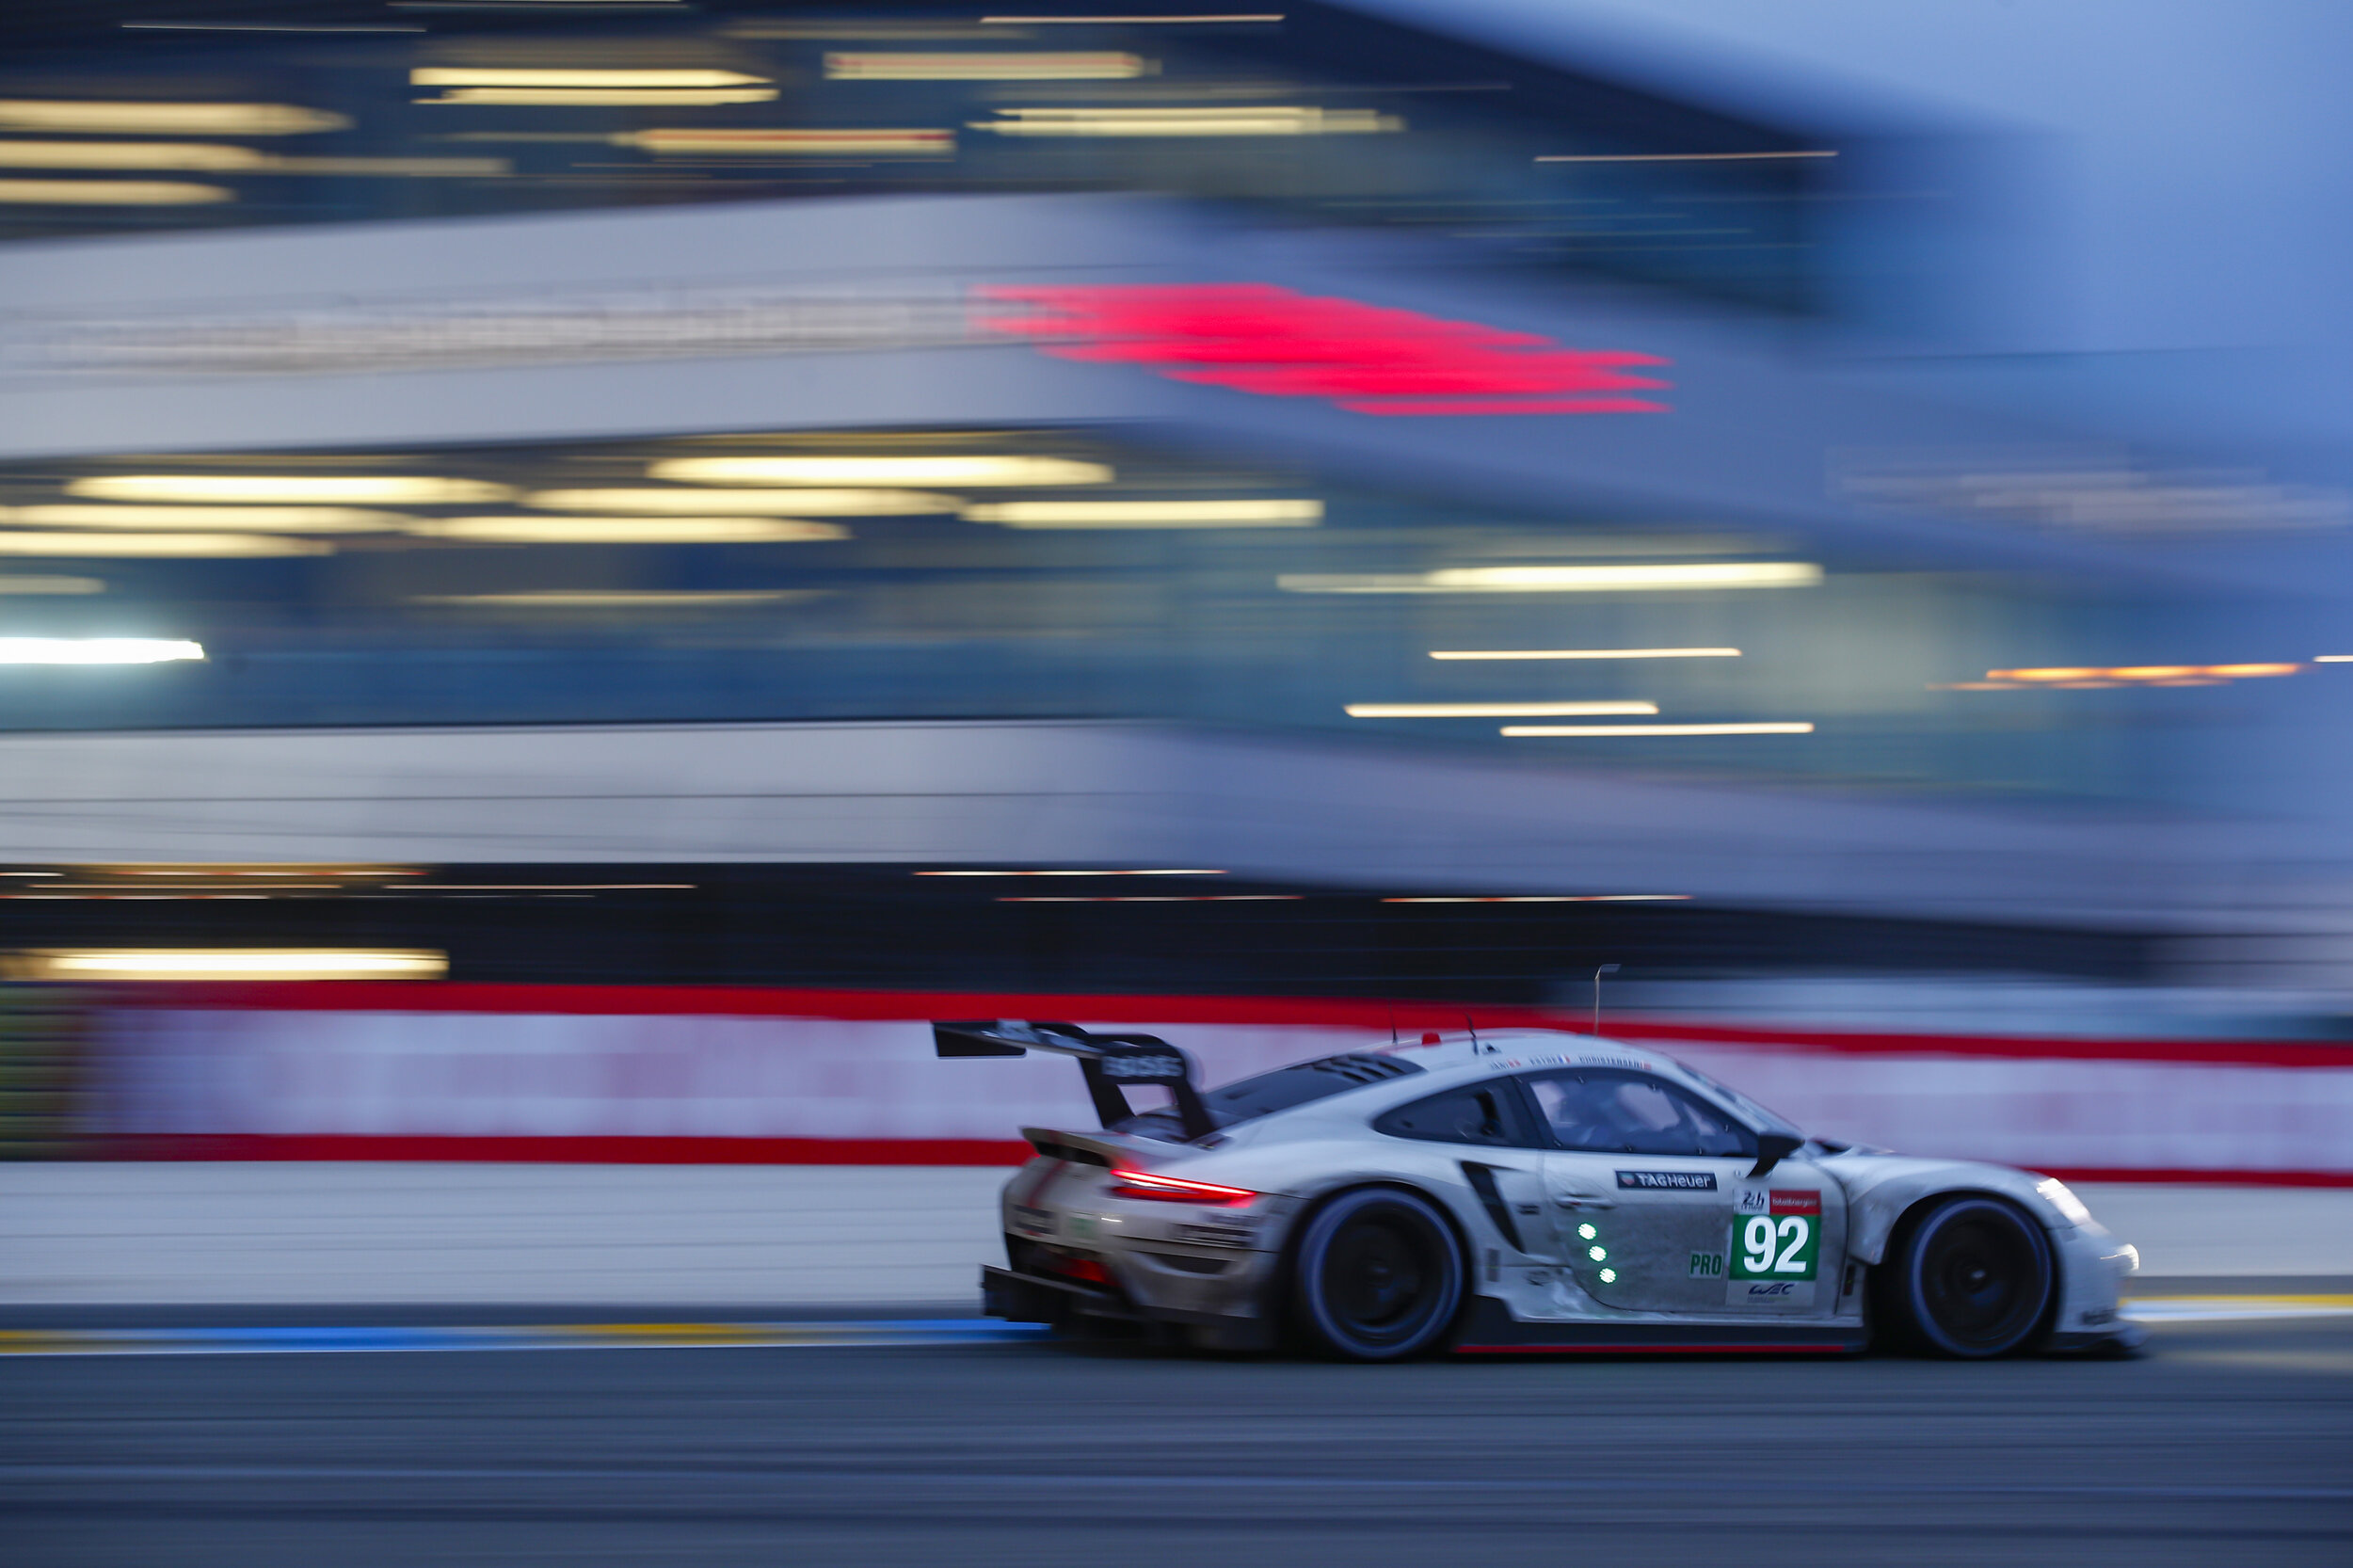 Porsche 911 RSR on podium course at the 24 Hours of Le Mans — PorscheSport Latest Motorsport News and Interviews